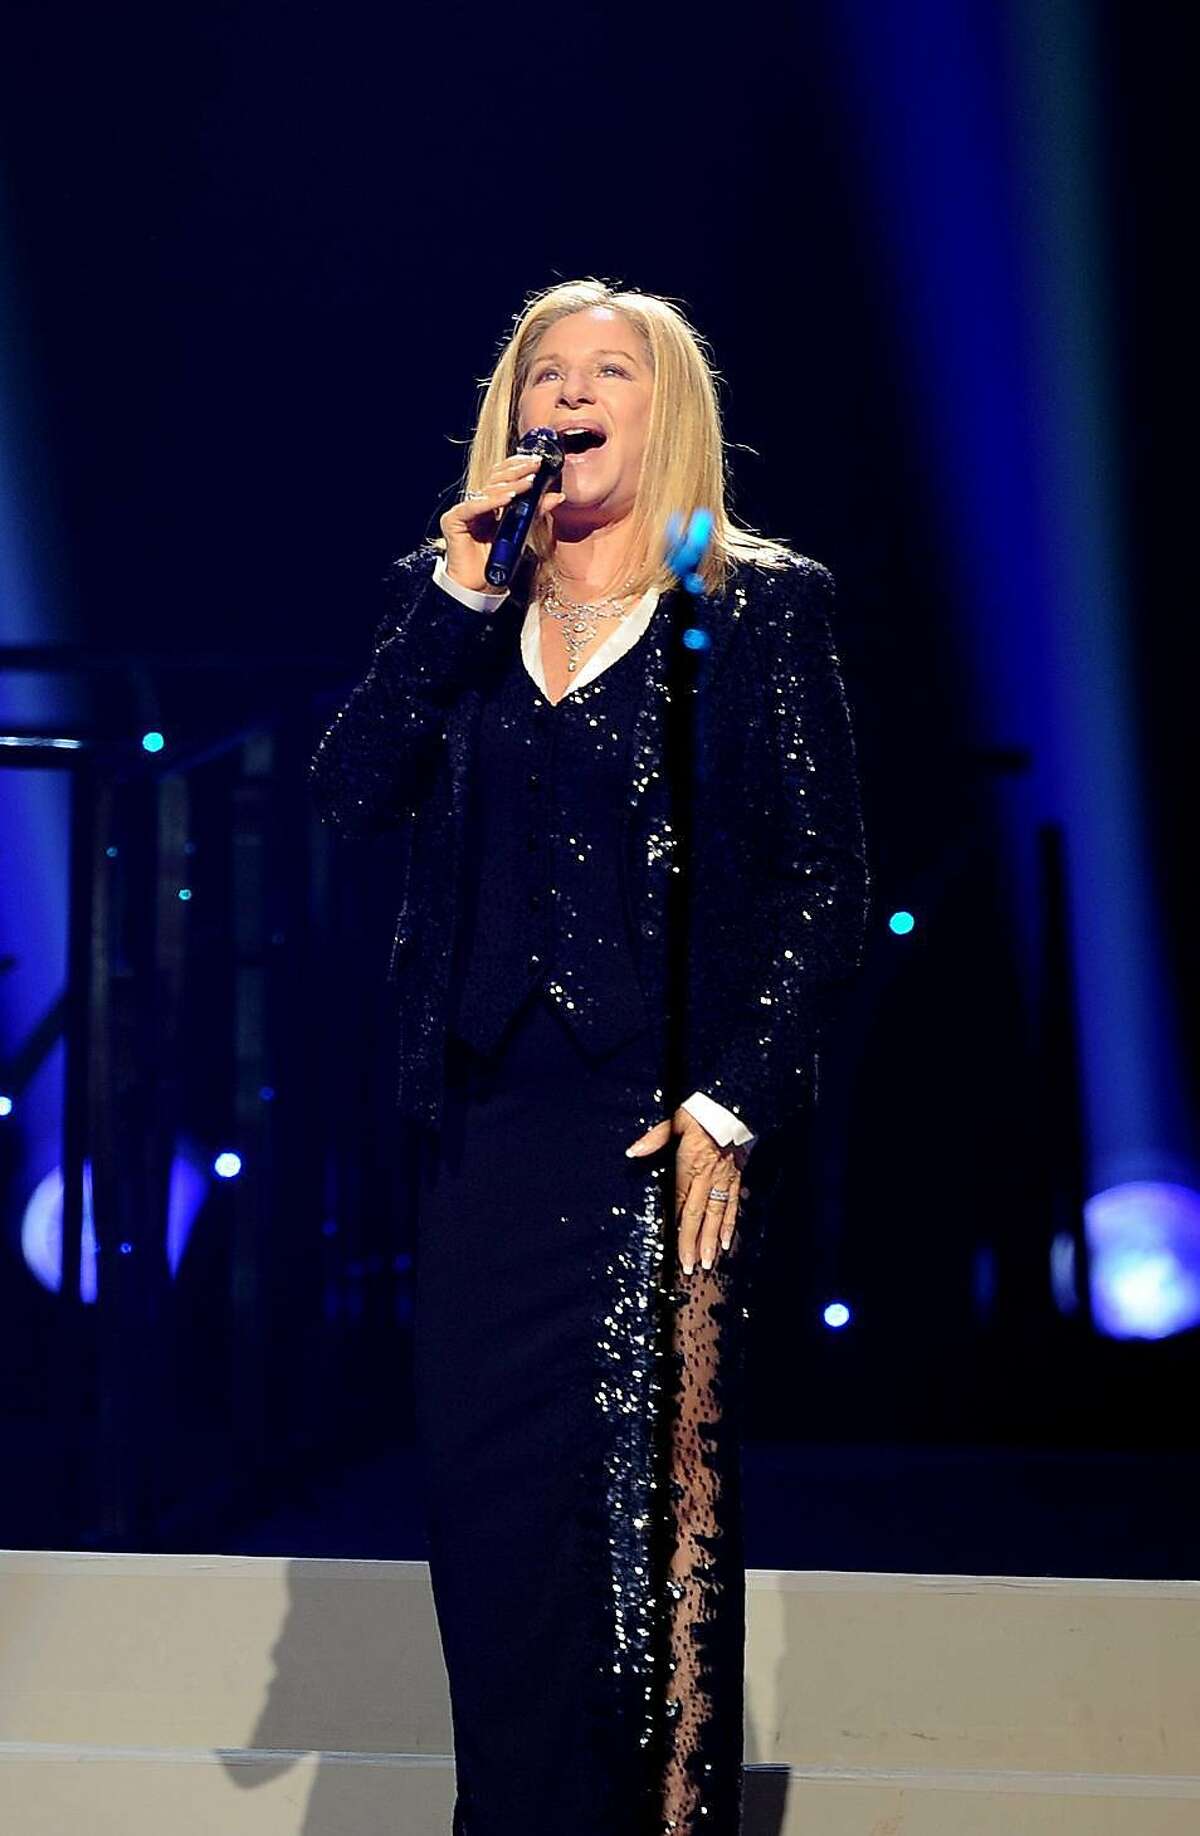 In this photo provided by the Las Vegas News Bureau, the incomparable Barbra Streisand preforms at the MGM Grand Garden Arena on the Las Vegas Strip. Friday, Nov. 2, 2012. (AP Photo/Las Vegas News Bureau, Glenn Pinkerton)